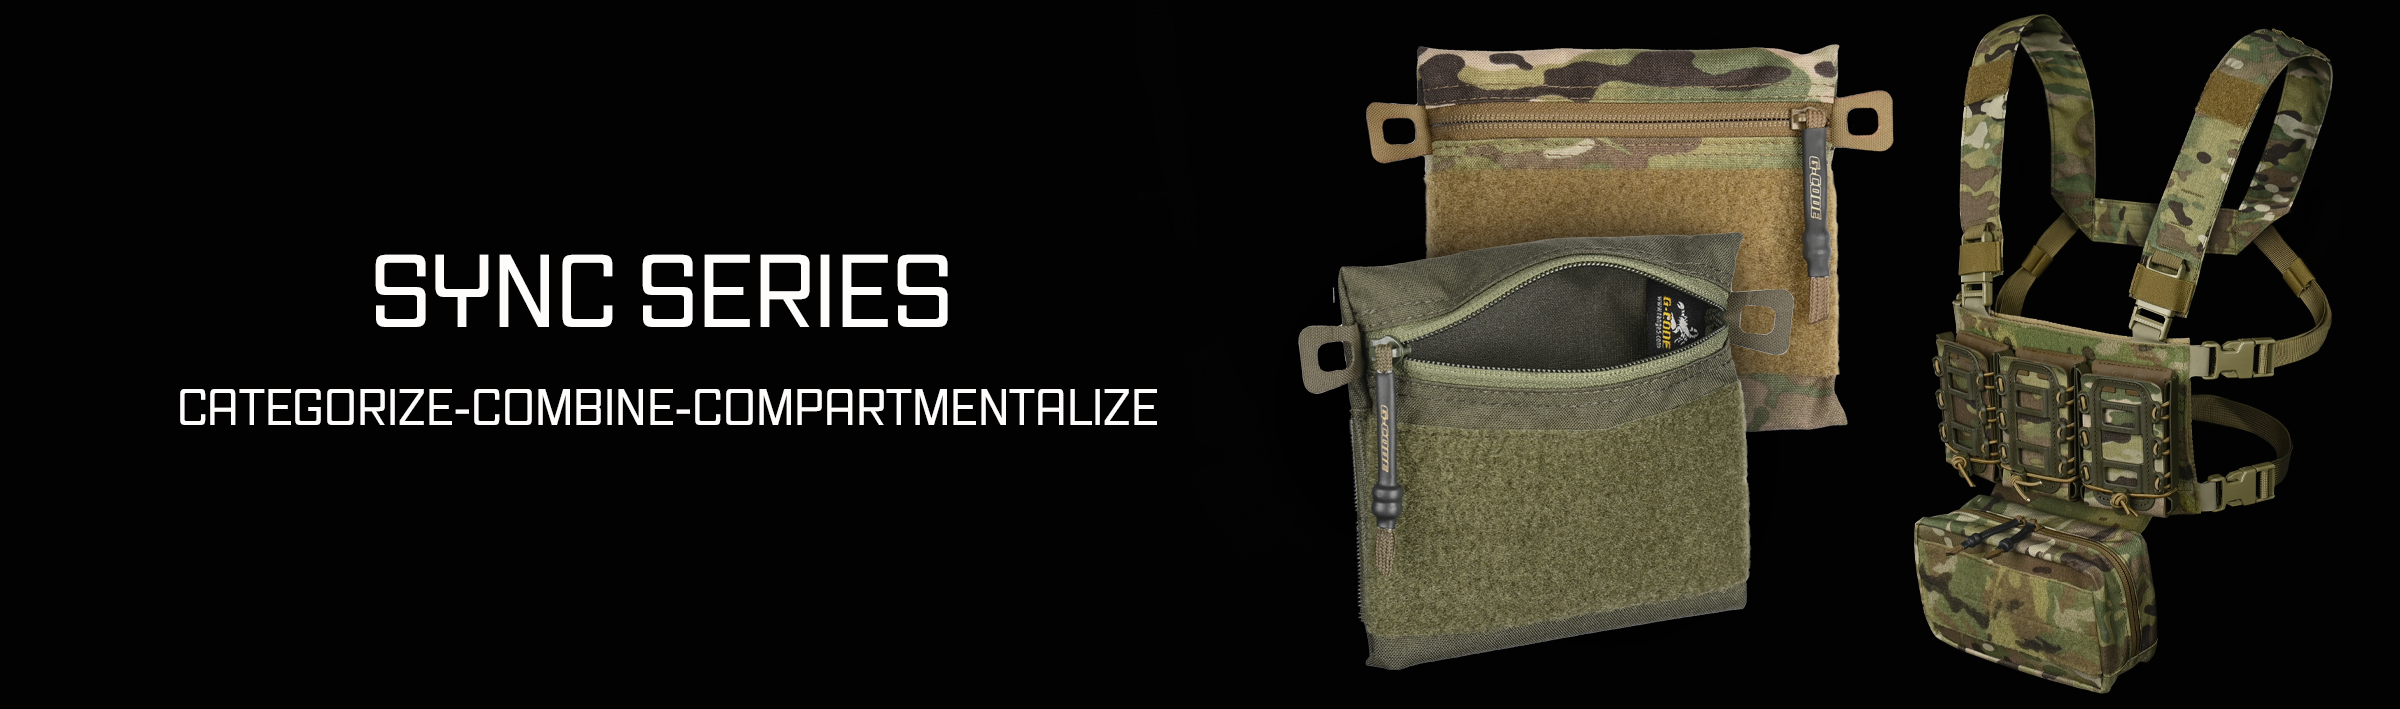 Sync Series - tactical holsters and equipment